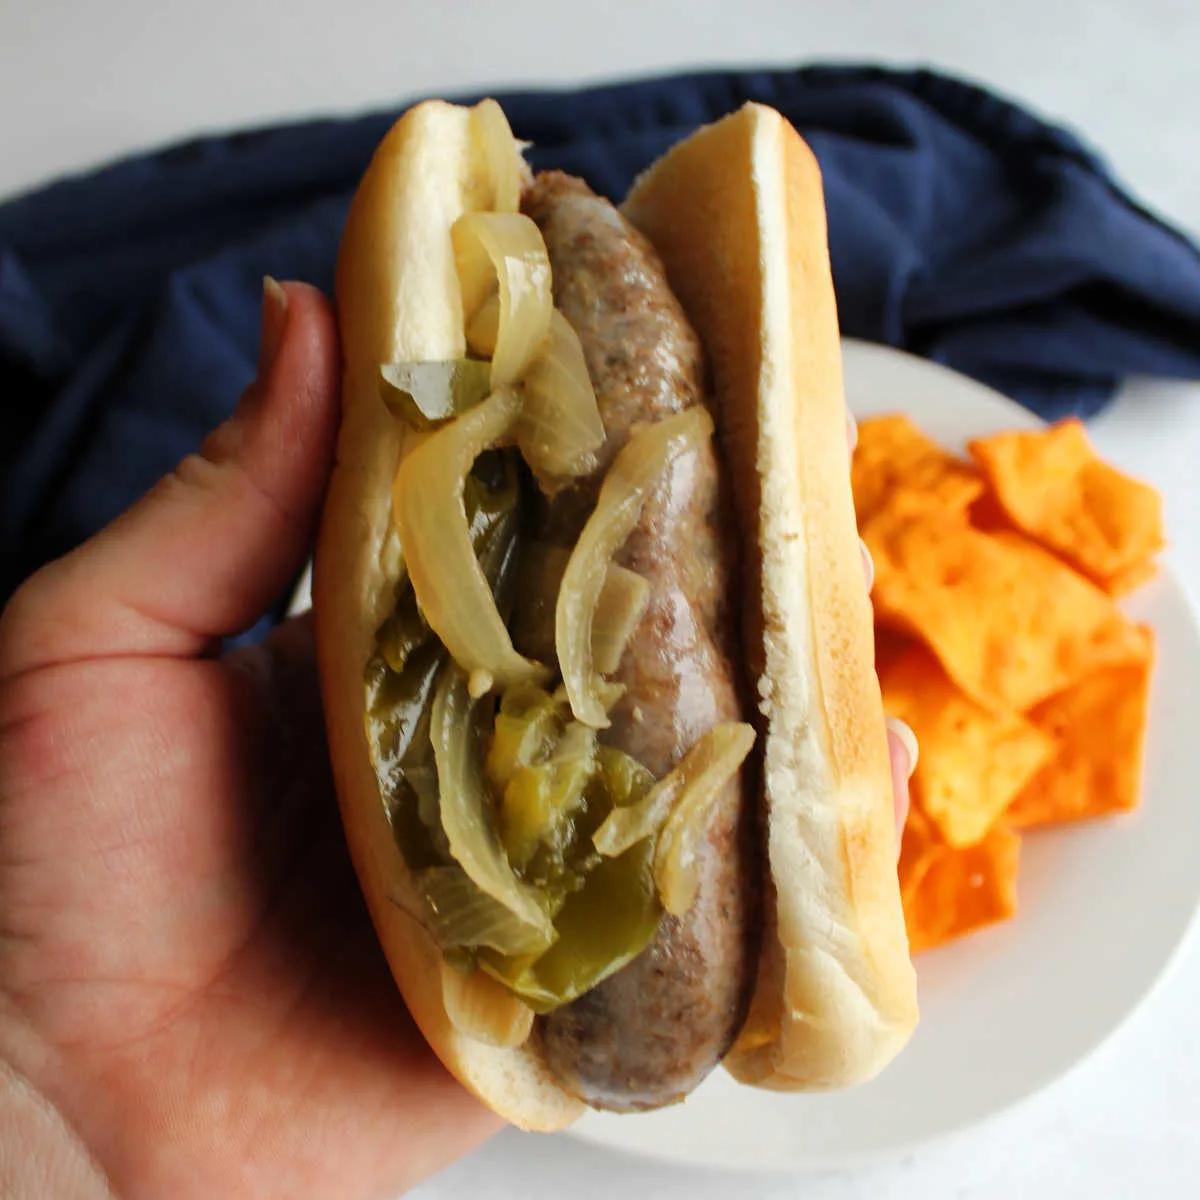 Hand holding bun filled with a brat and cooked onions and green peppers.